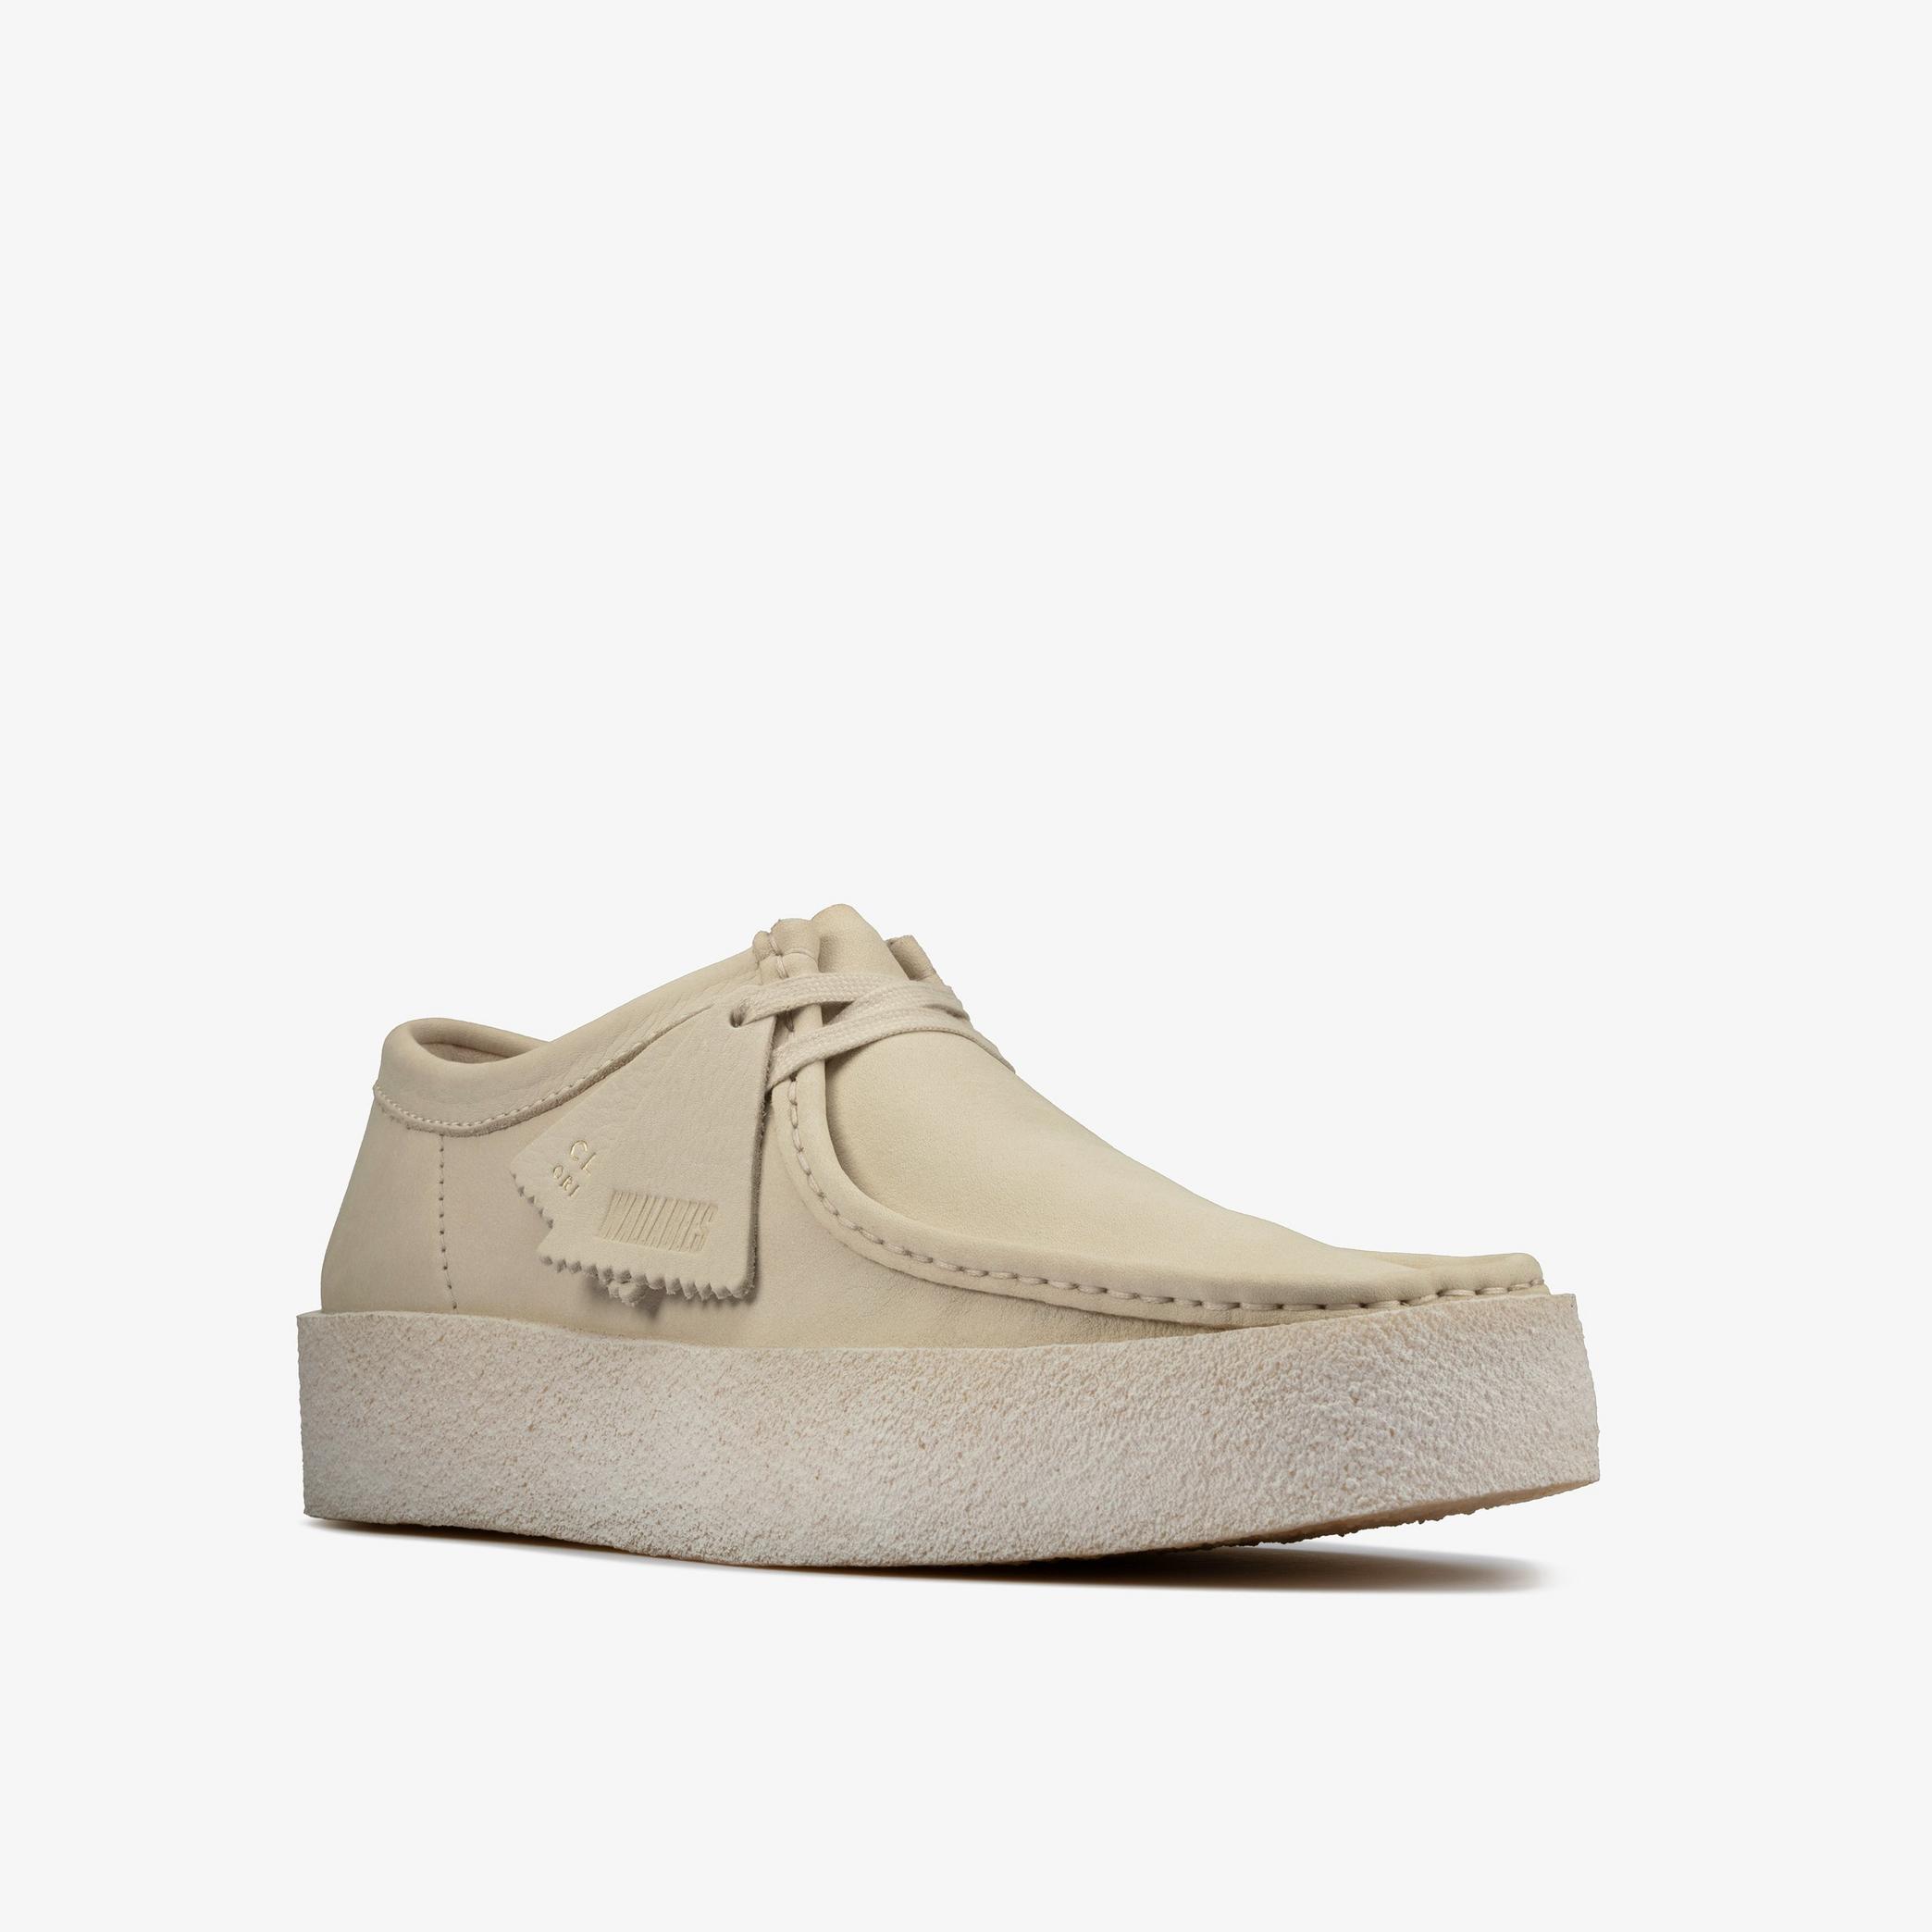 Wallabee Cup White Nubuck Wallabee, view 3 of 7